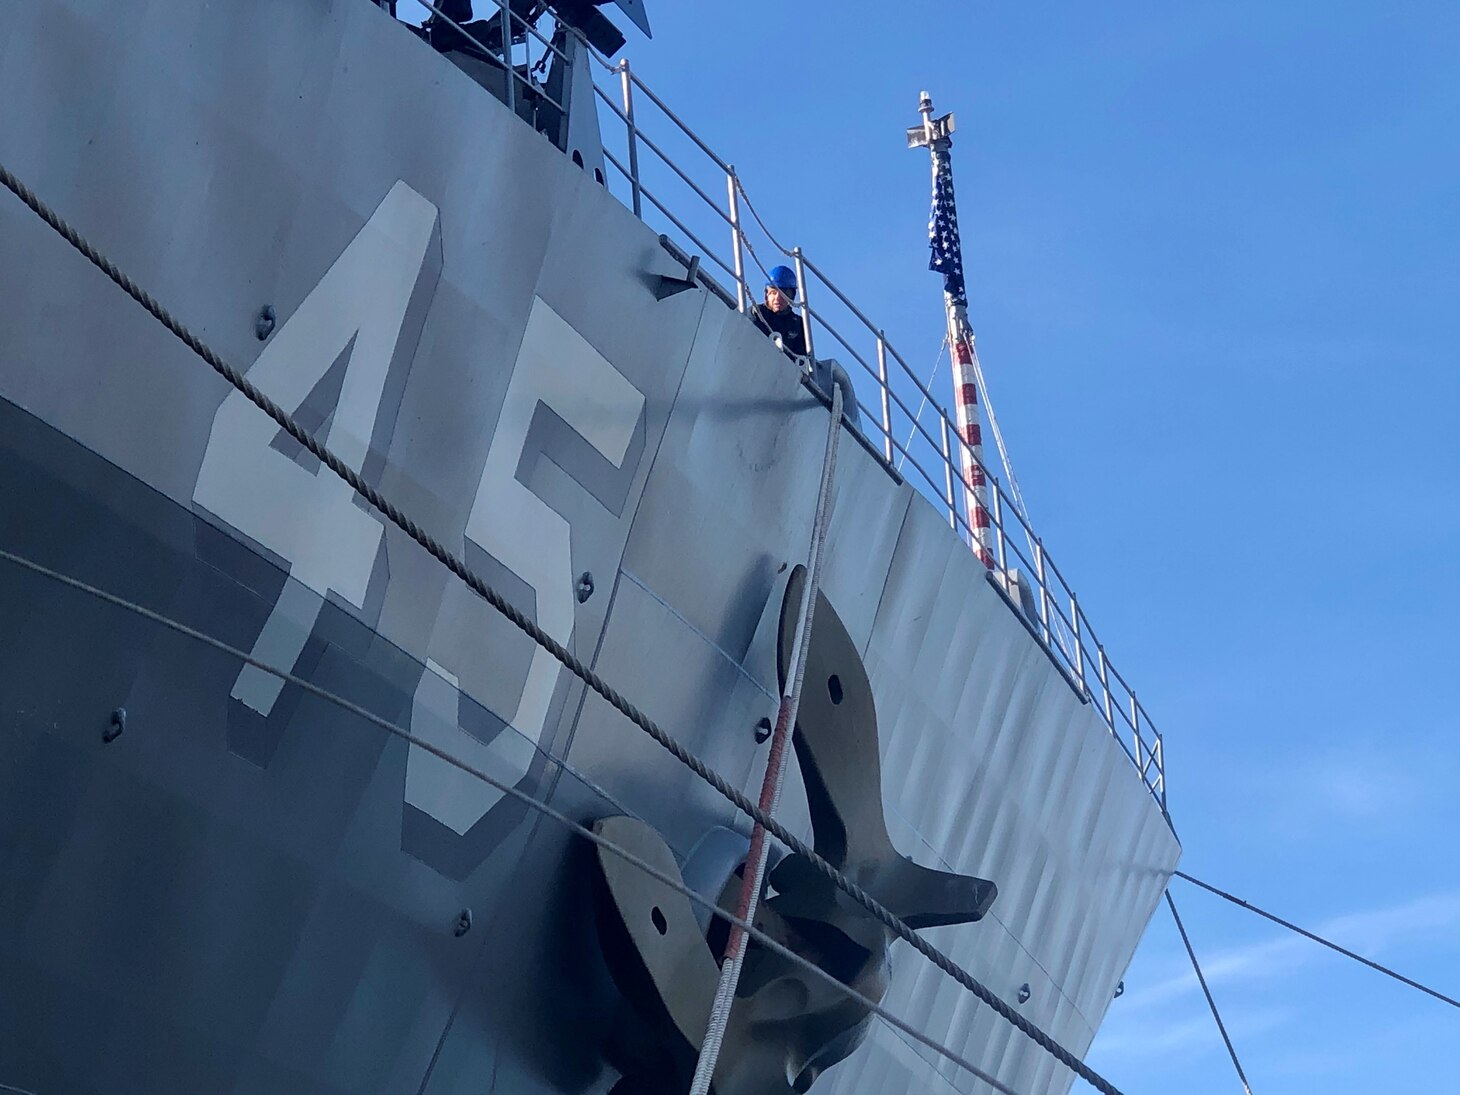 NAVAL BASE SAN DIEGO (Jan. 28, 2021) Whidbey Island-class dock landing ship USS Comstock (LSD 45) returns to its homeport of Naval Base San Diego, January 28.  Comstock returned following a deployment to the U.S. 7th Fleet and U.S. 4th Fleet areas of operation. (U.S. Navy photo by Mass Communication Specialist 2nd Class Robert S. Price)